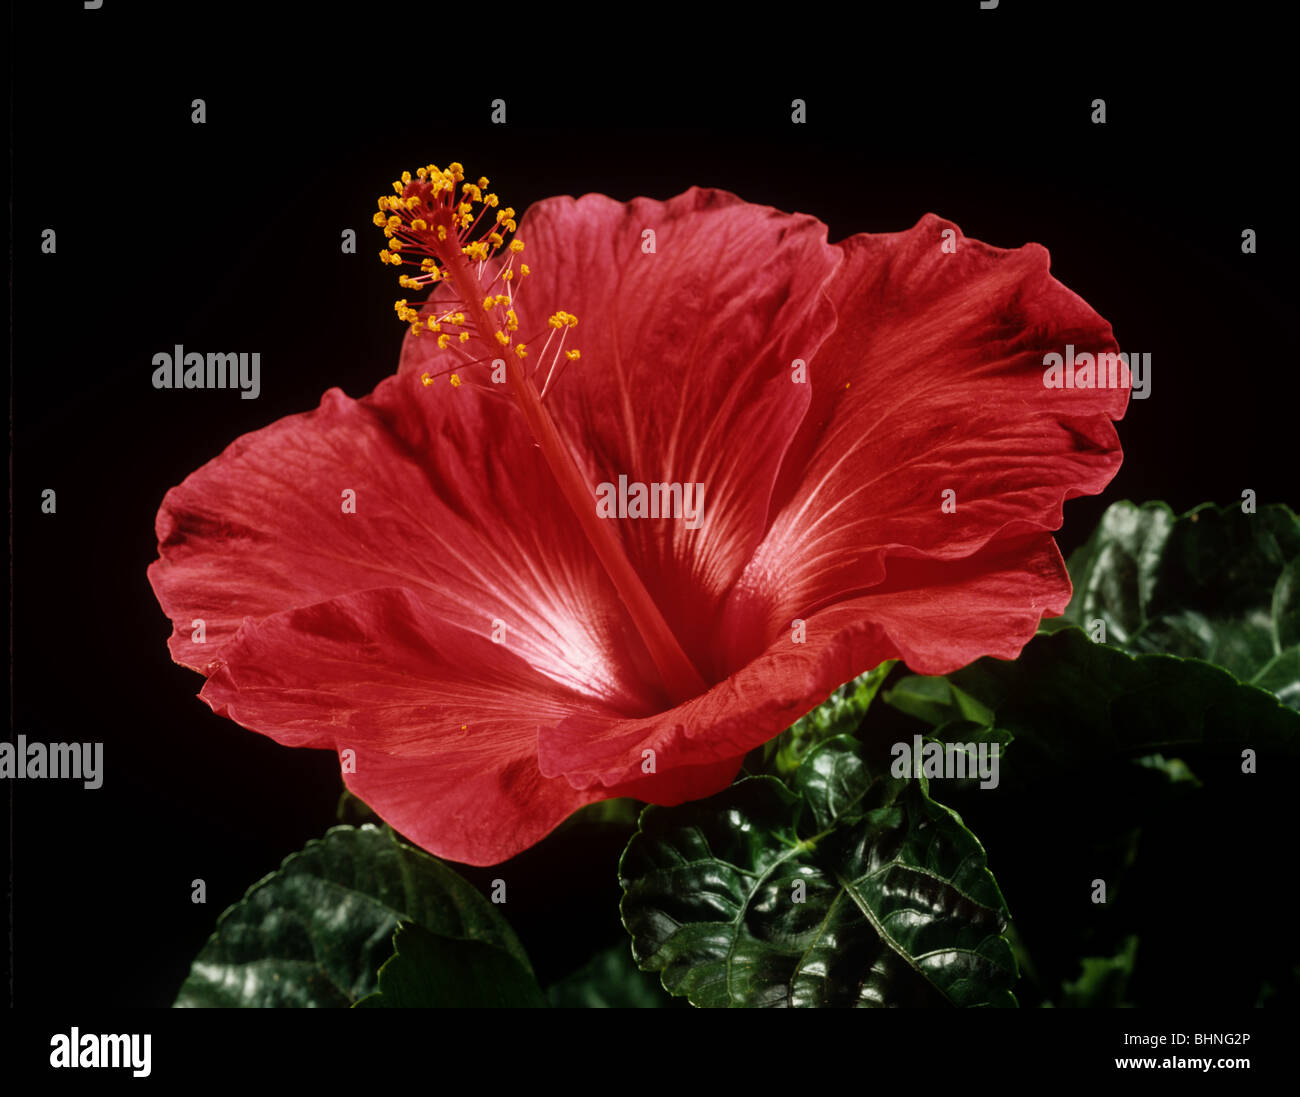 Flower and pistil of an Hibiscus rosa-sinensis plant Stock Photo